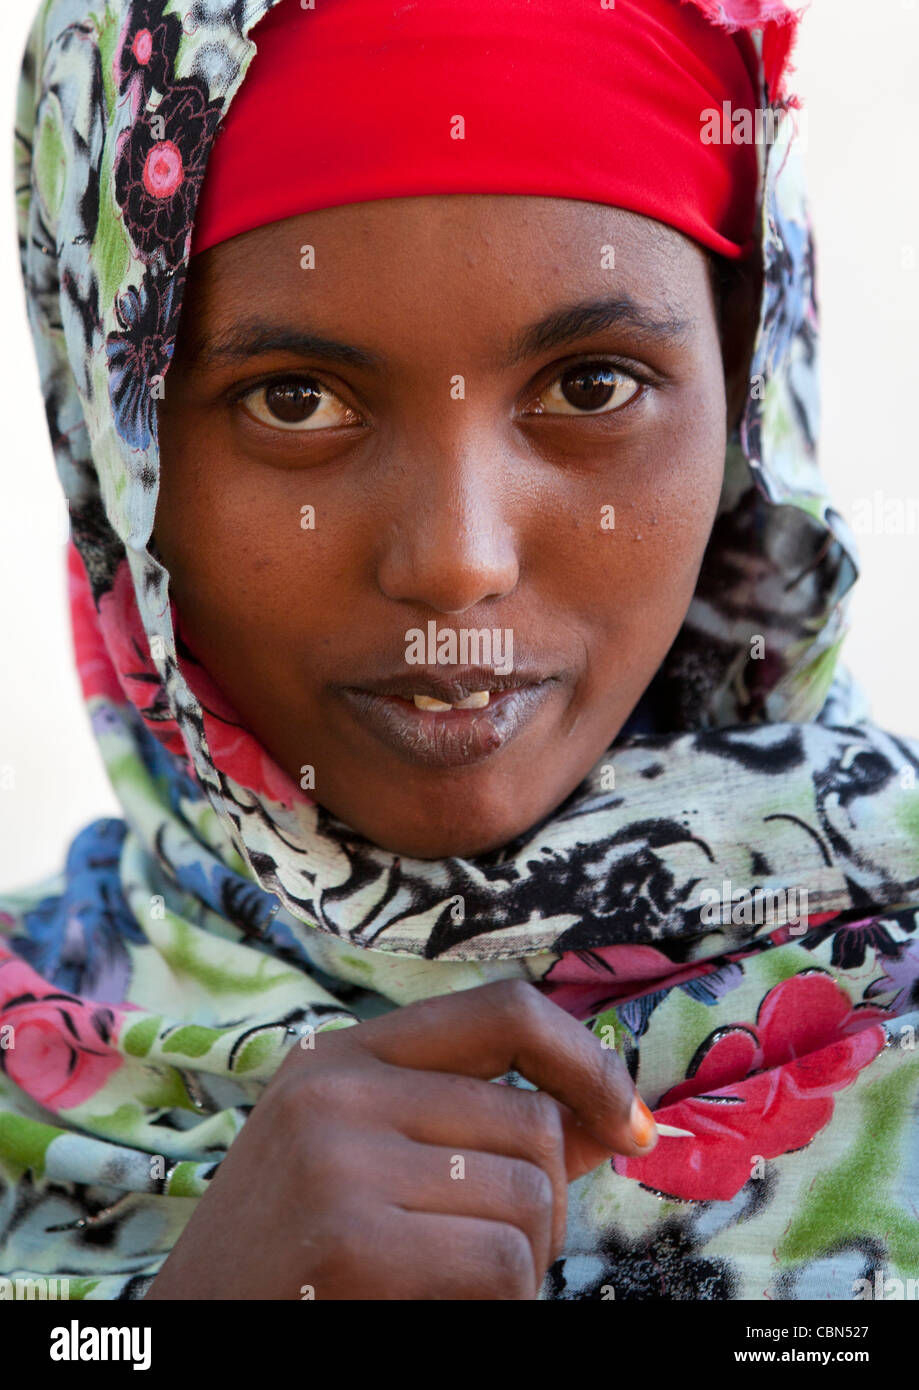 Portrait Of Cute Flower Patterns Veiled Young Woman Baligubadle Somaliland Stock Photo